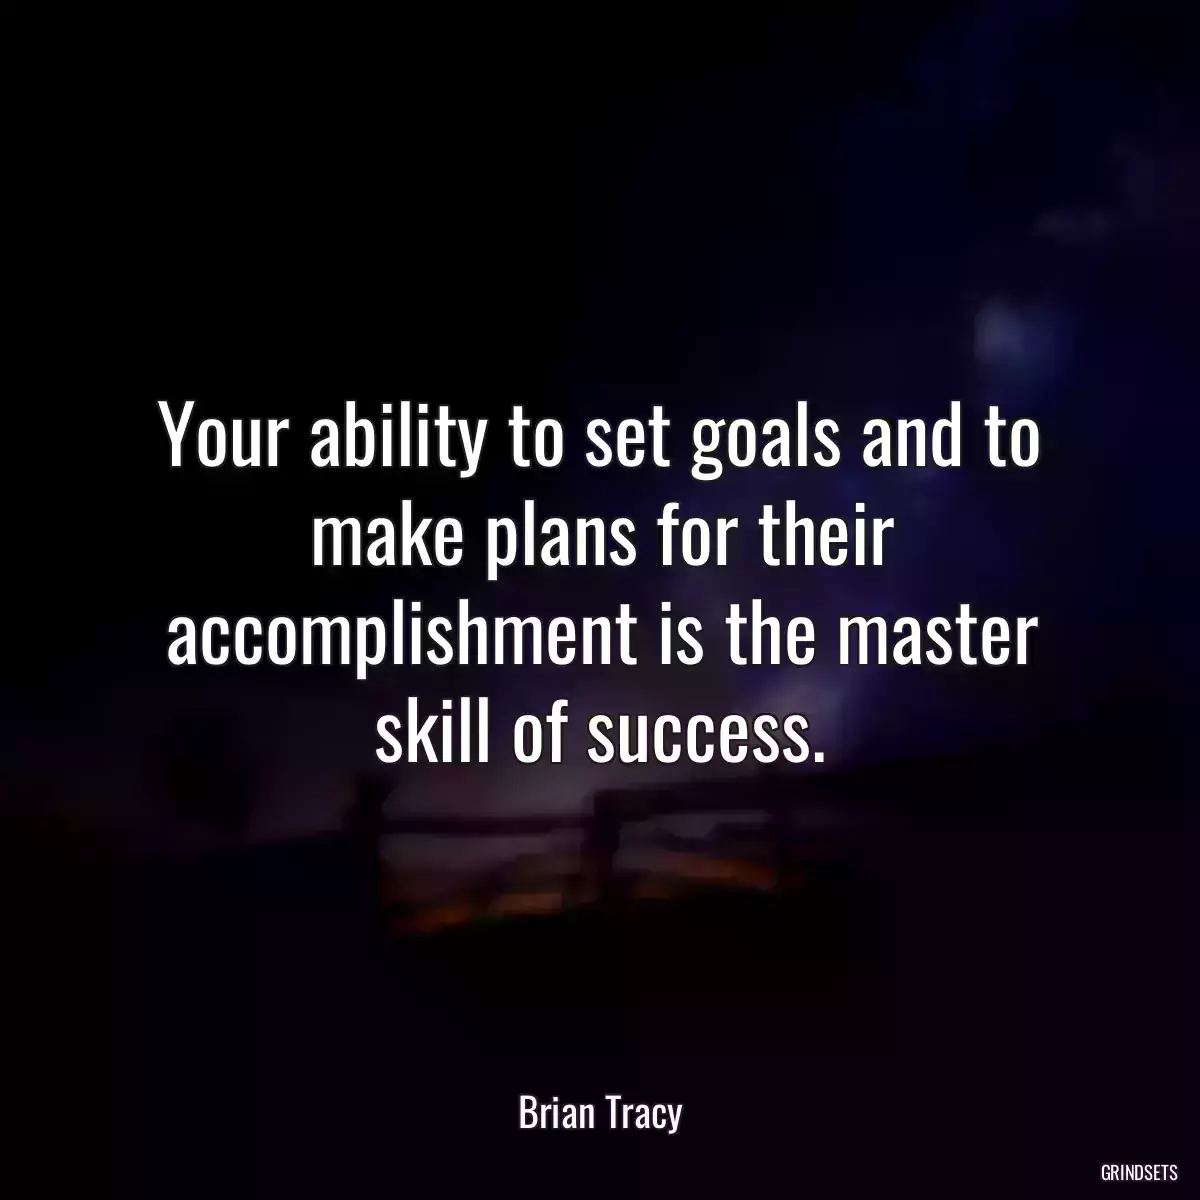 Your ability to set goals and to make plans for their accomplishment is the master skill of success.